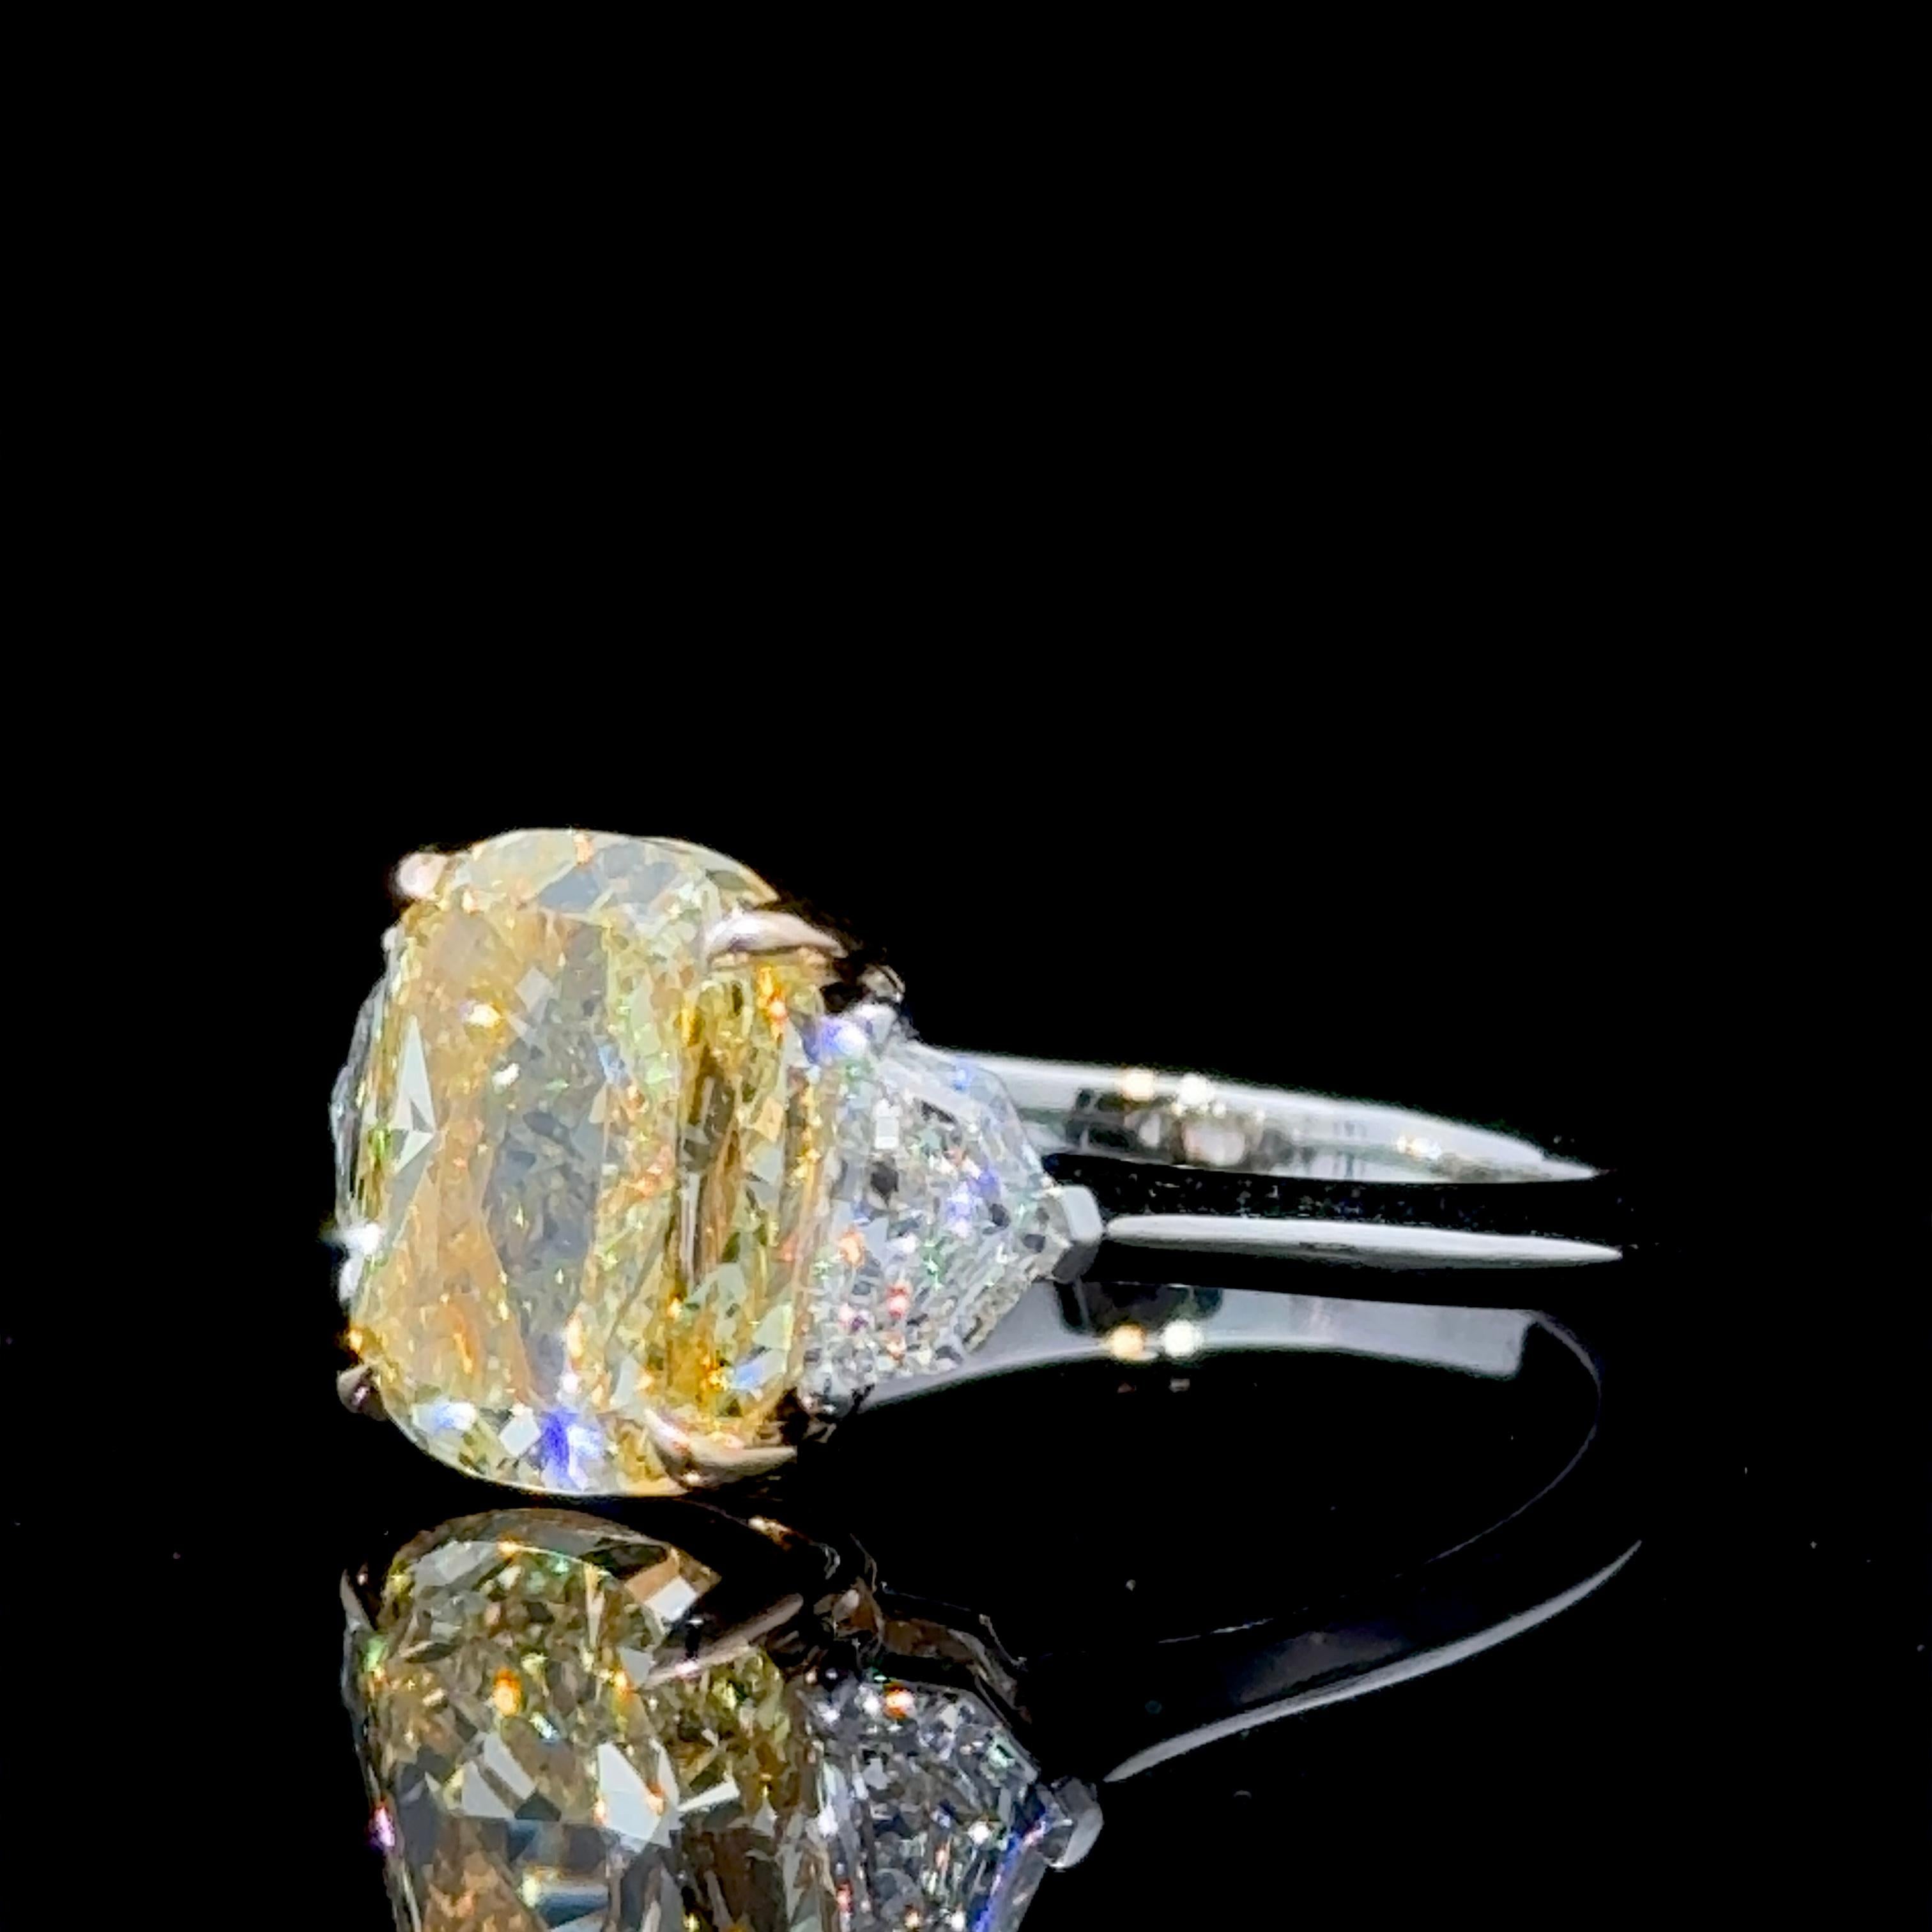 Amongst Cushion Cut Yellow Diamonds, Elongated Pillow Shapes are the most coveted and desired outlines
They look larger than their weight suggests, and they look like true gems..

Our vibrant and pure GIA Certified 4.02 Carat Cushion Cut Fancy